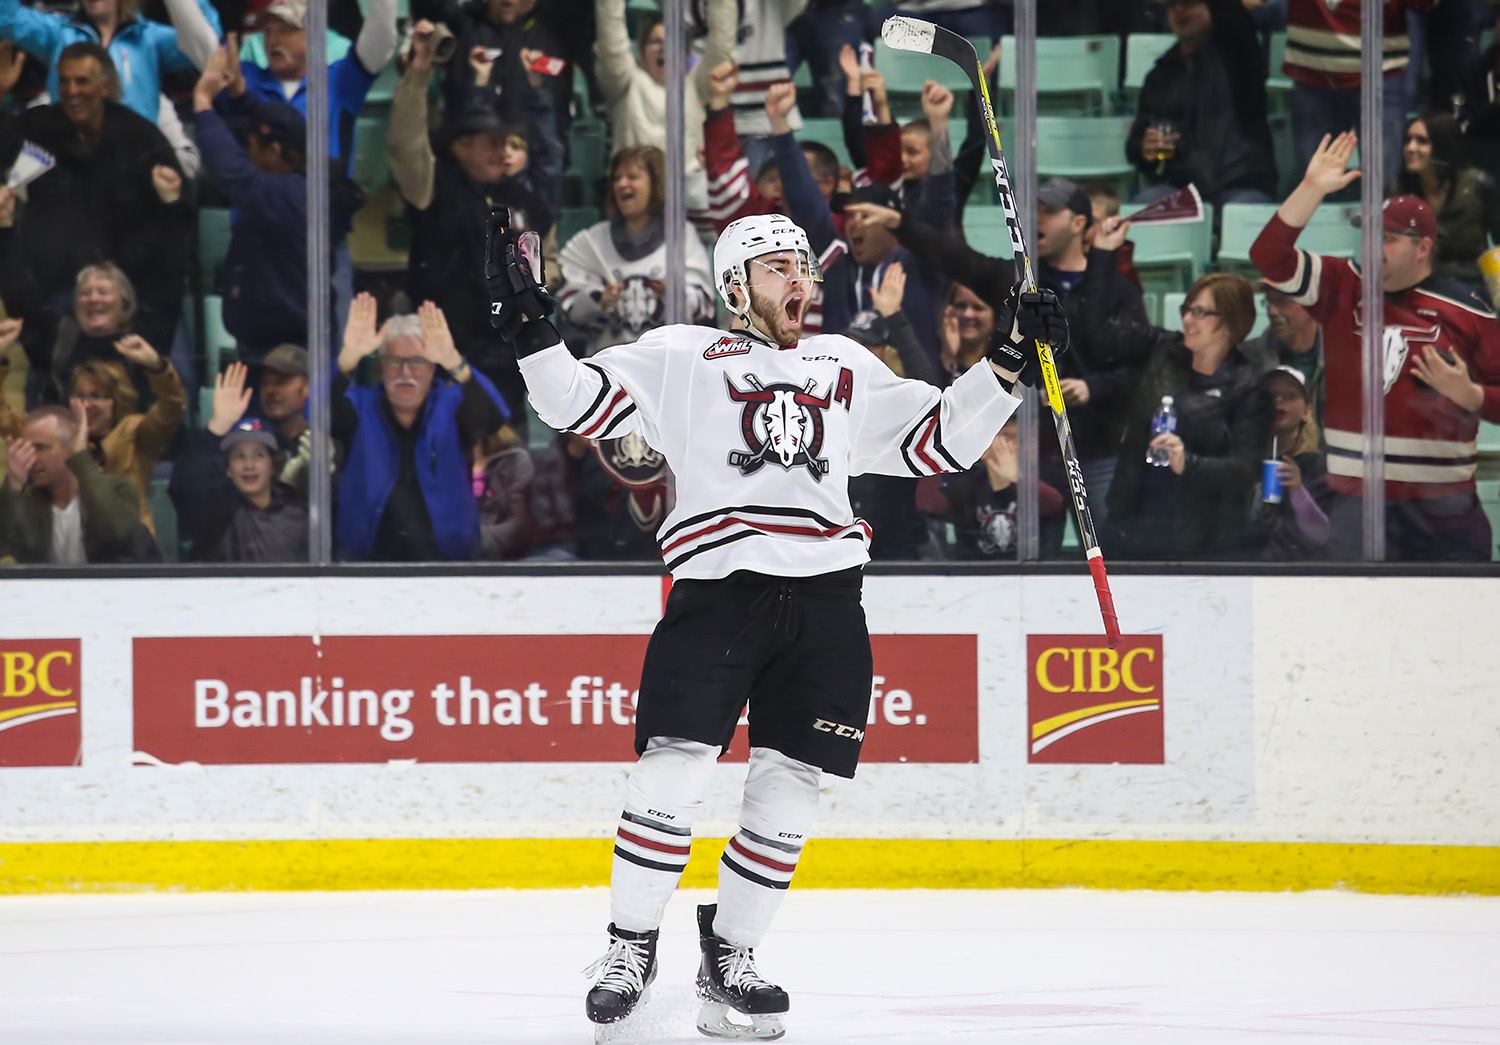 BIG WINS - The Red Deer Rebels wrapped up games three and four at the ENMAX Centrium against the Lethbridge Hurricanes earlier this week. The Rebels lead the series 3-1 and head down south for game five on Saturday.